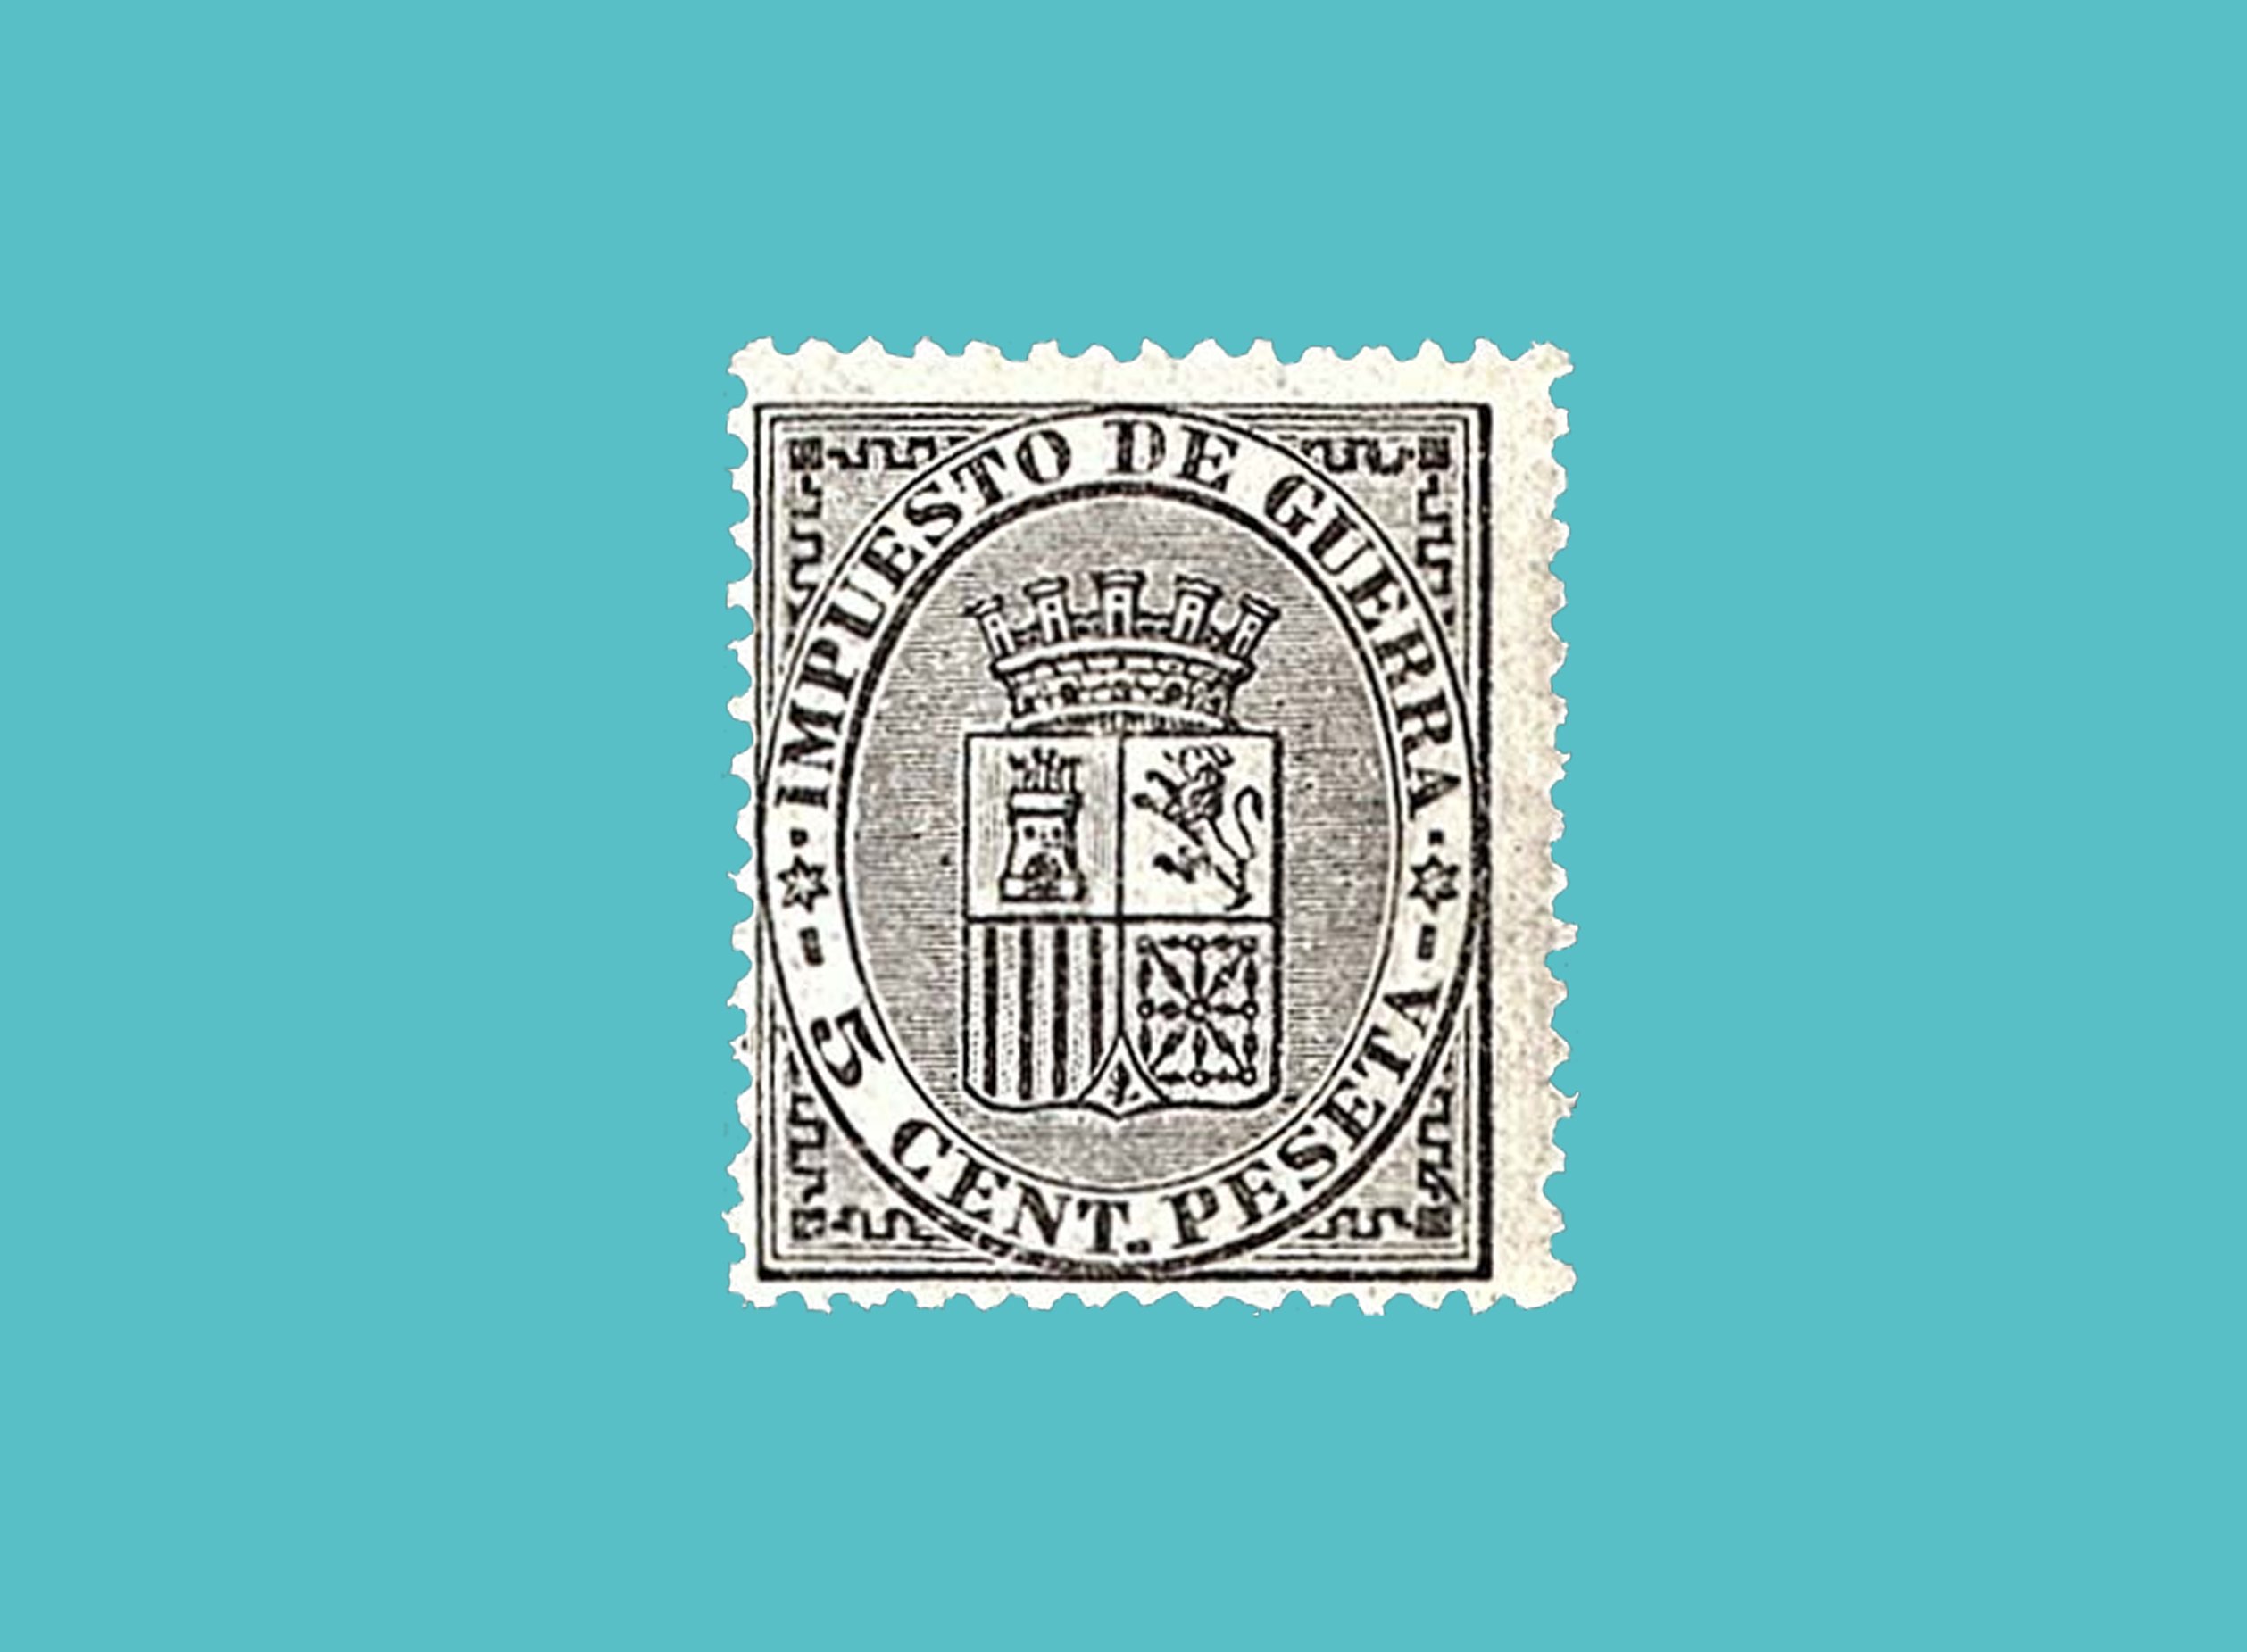 First tax stamp